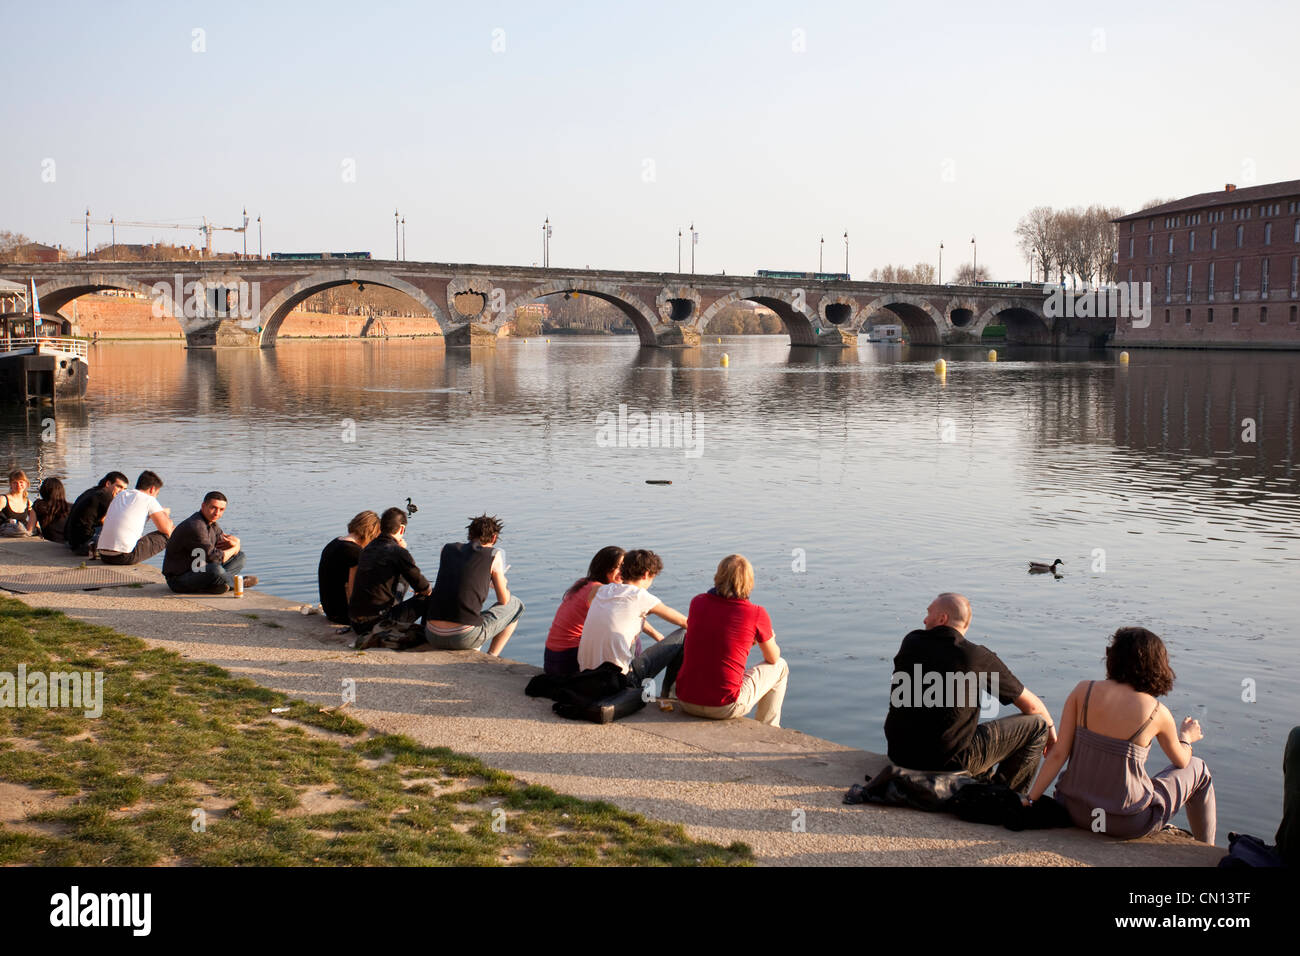 Pont Neuf, 16th century bridge seen from The Port de la Daurade in Toulouse, South of France. Stock Photo